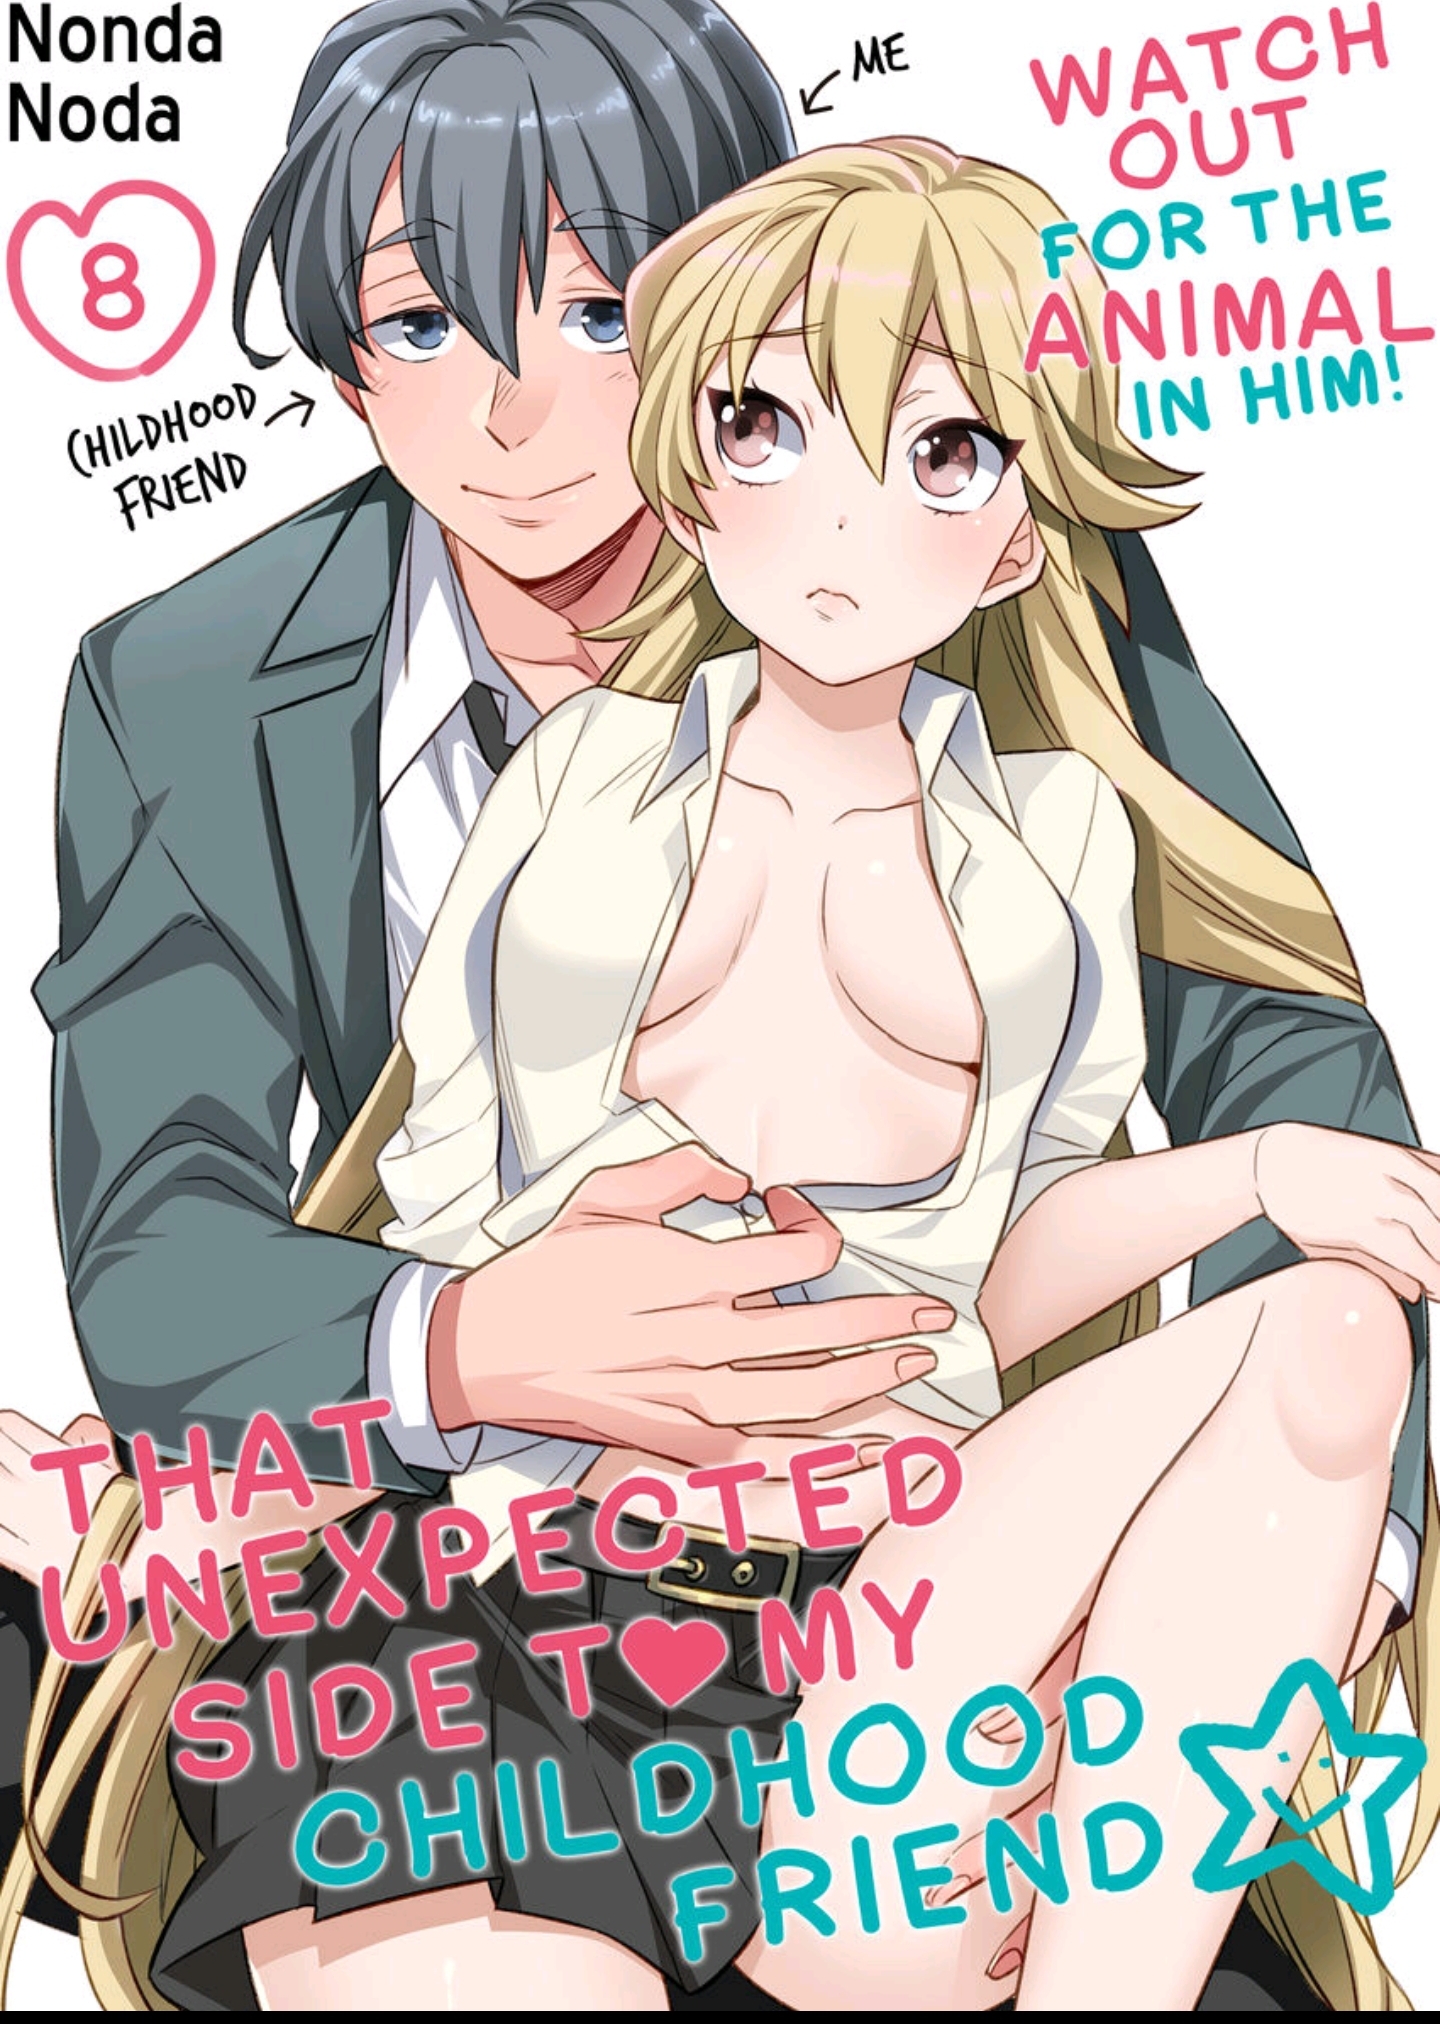 That Unexpected Side to my Childhood Friend -Watch Out for the Animal in Him! Vol.1 Ch.8